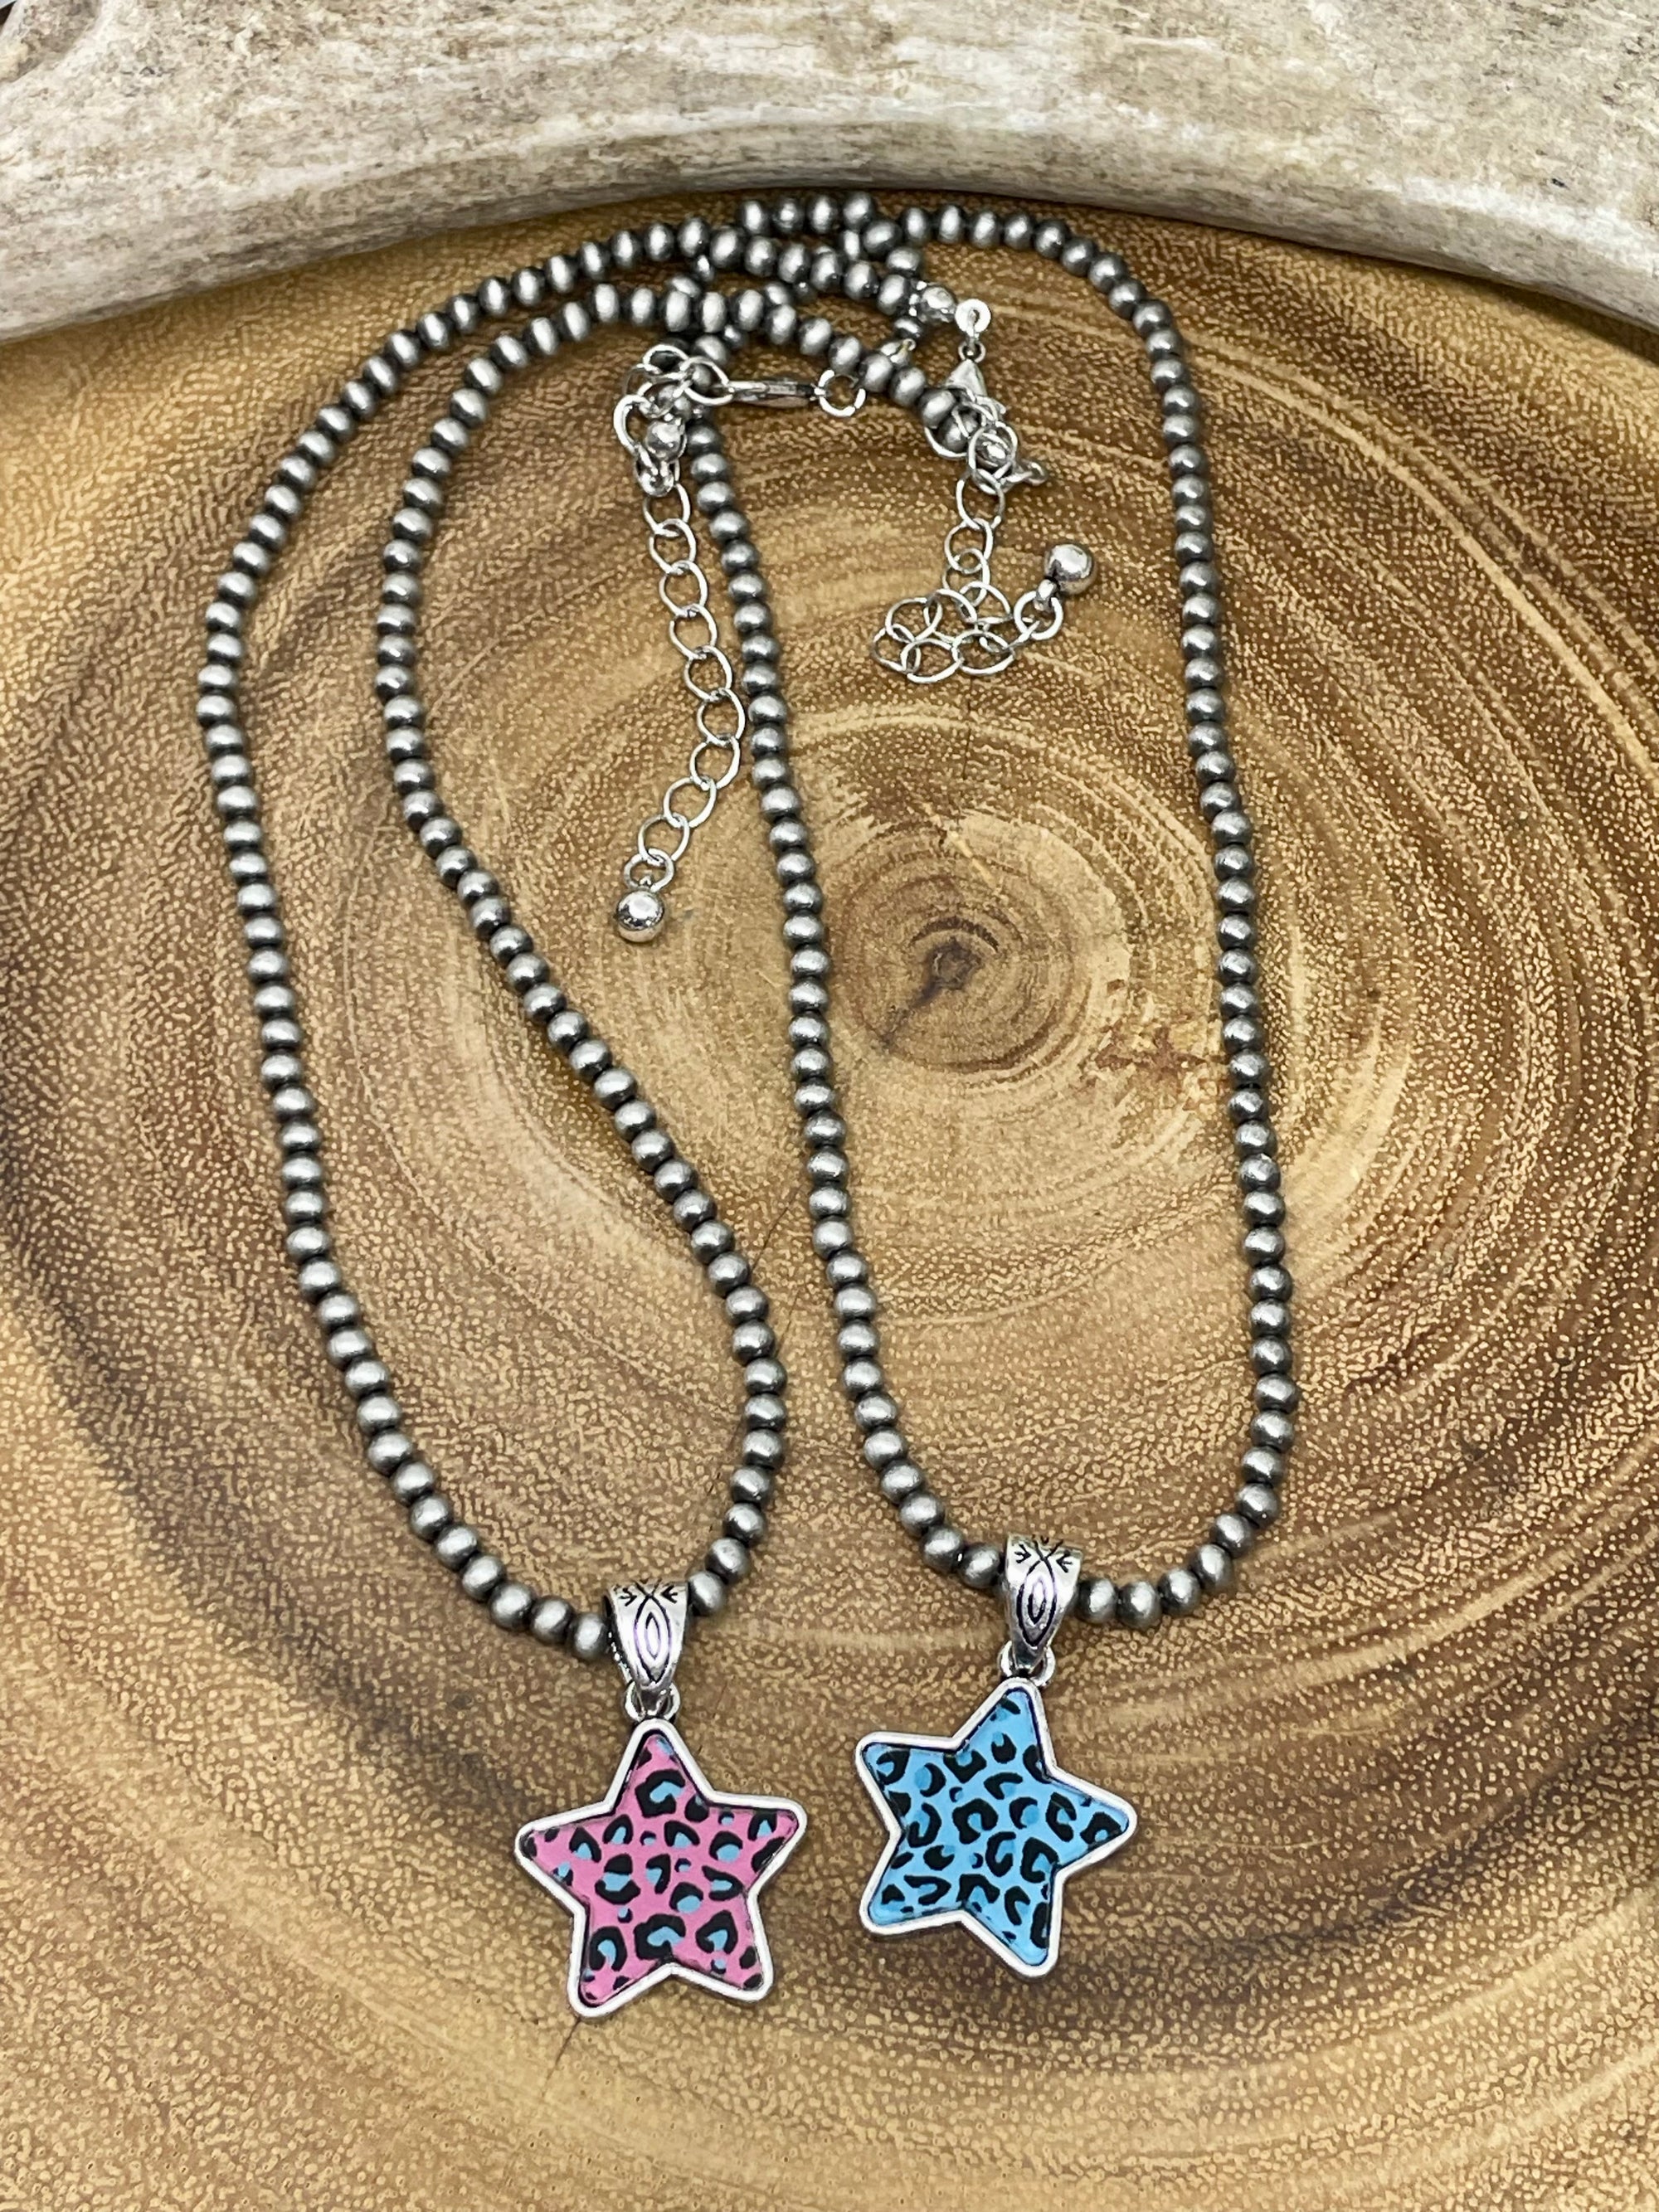 Center Stage 3mm Fashion Navajo Necklace with Leopard Star Pendant - 16"